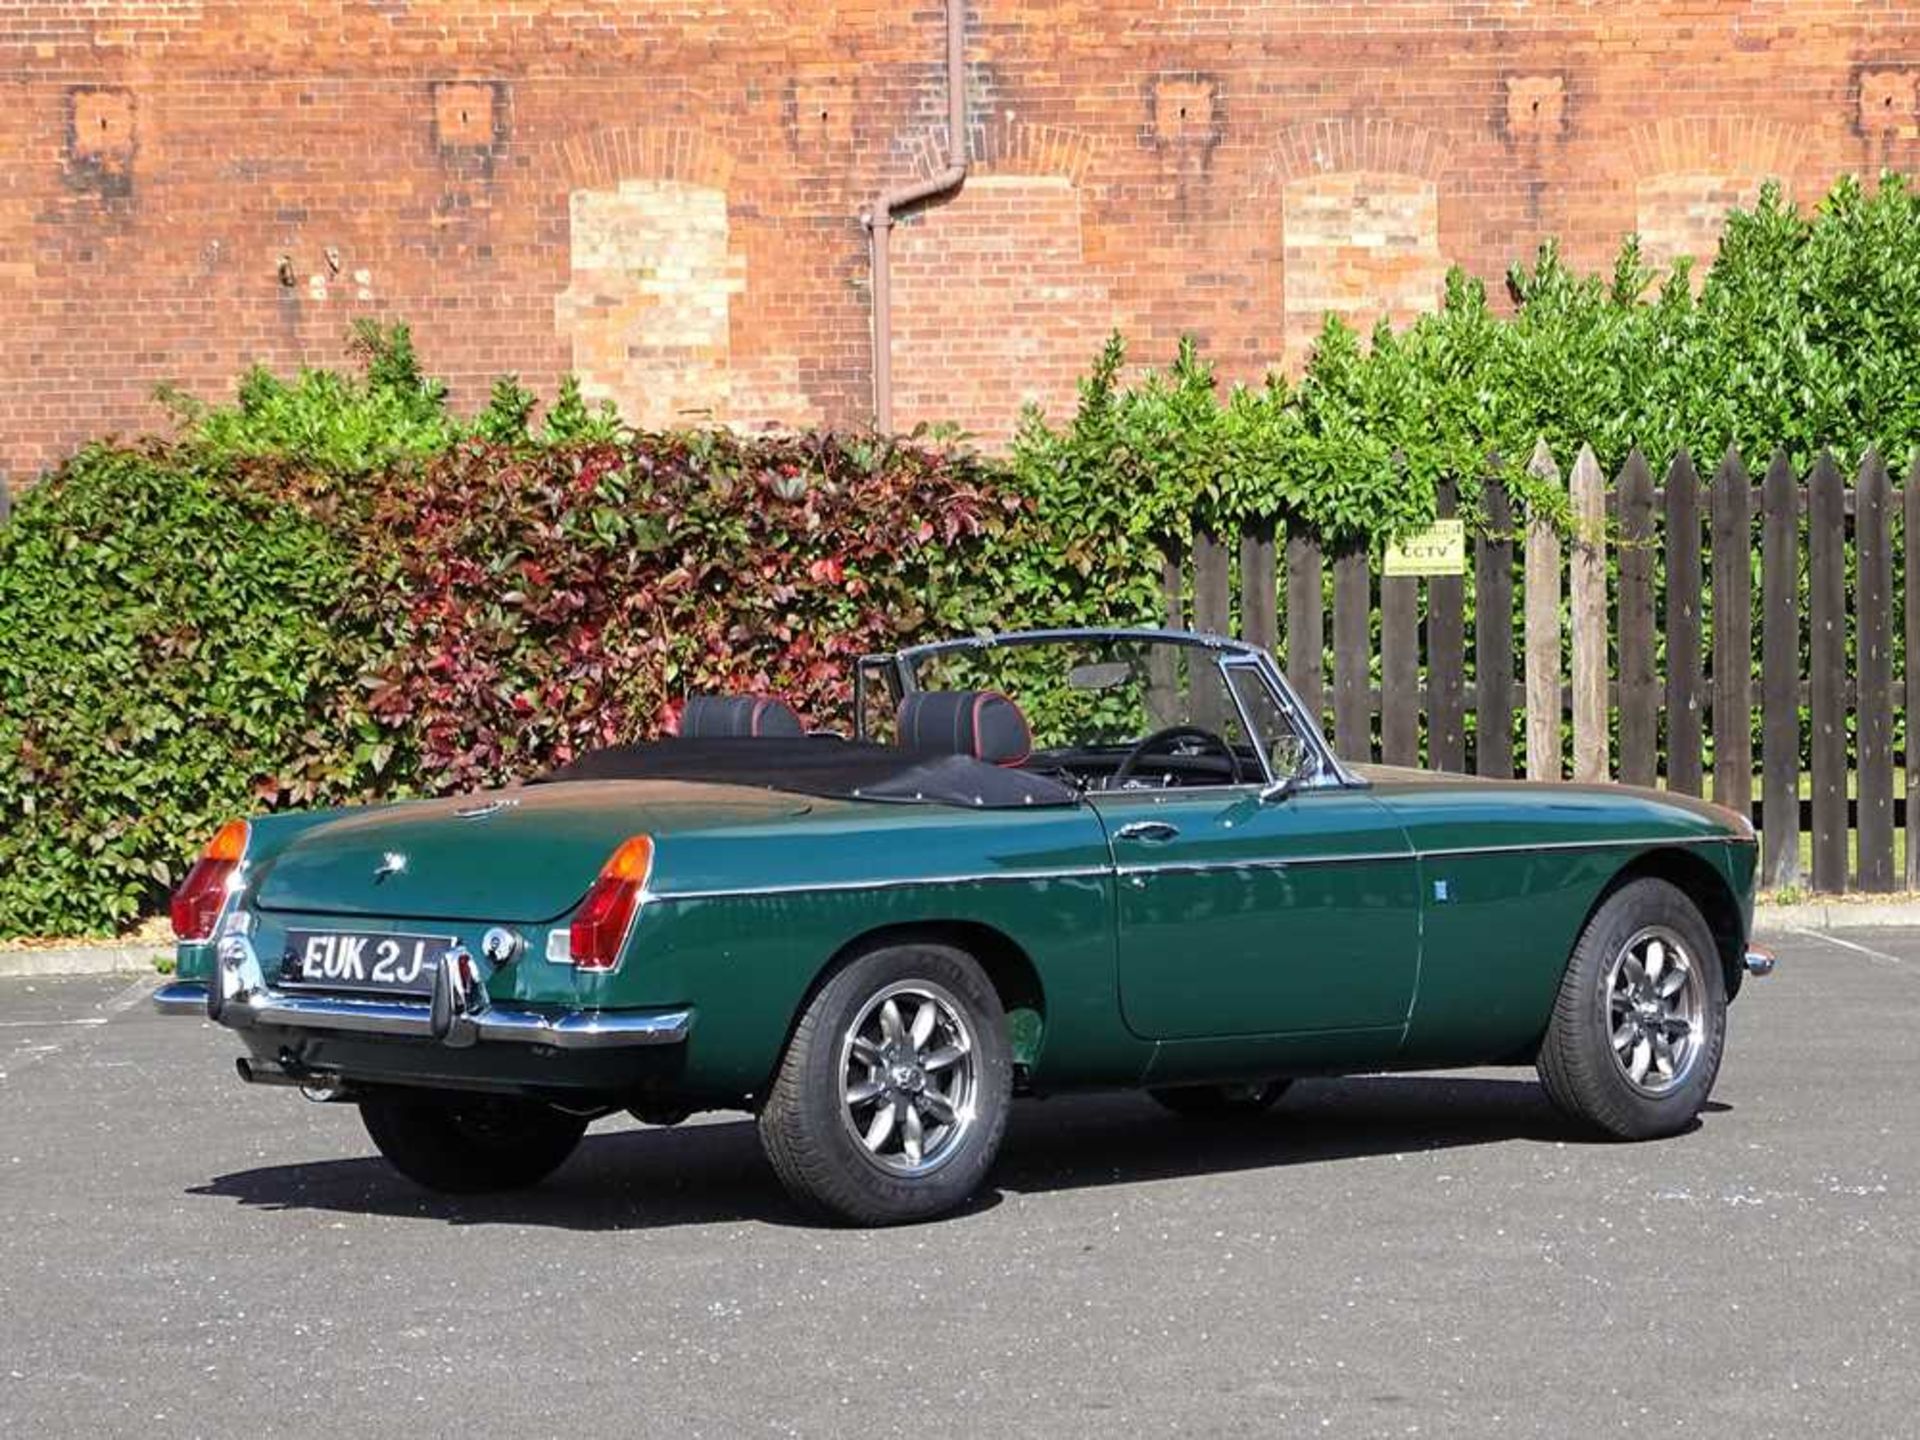 1971 MG B Roadster Restored at a cost of c.£33,000 - Image 12 of 43